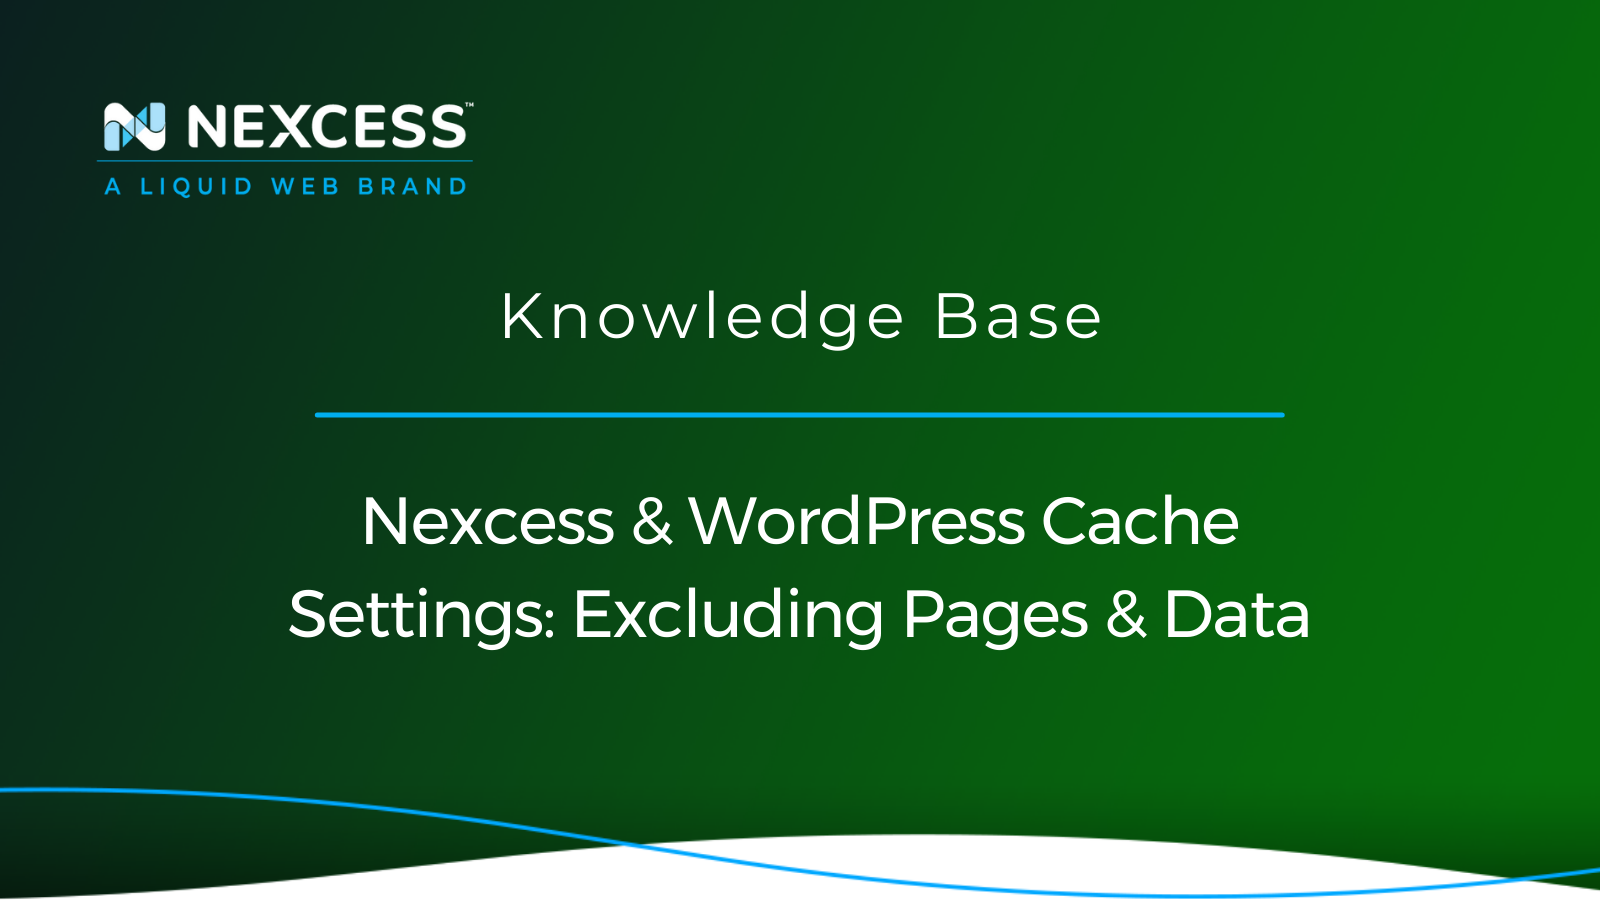 Nexcess & WordPress Cache Settings: Excluding Pages & Data